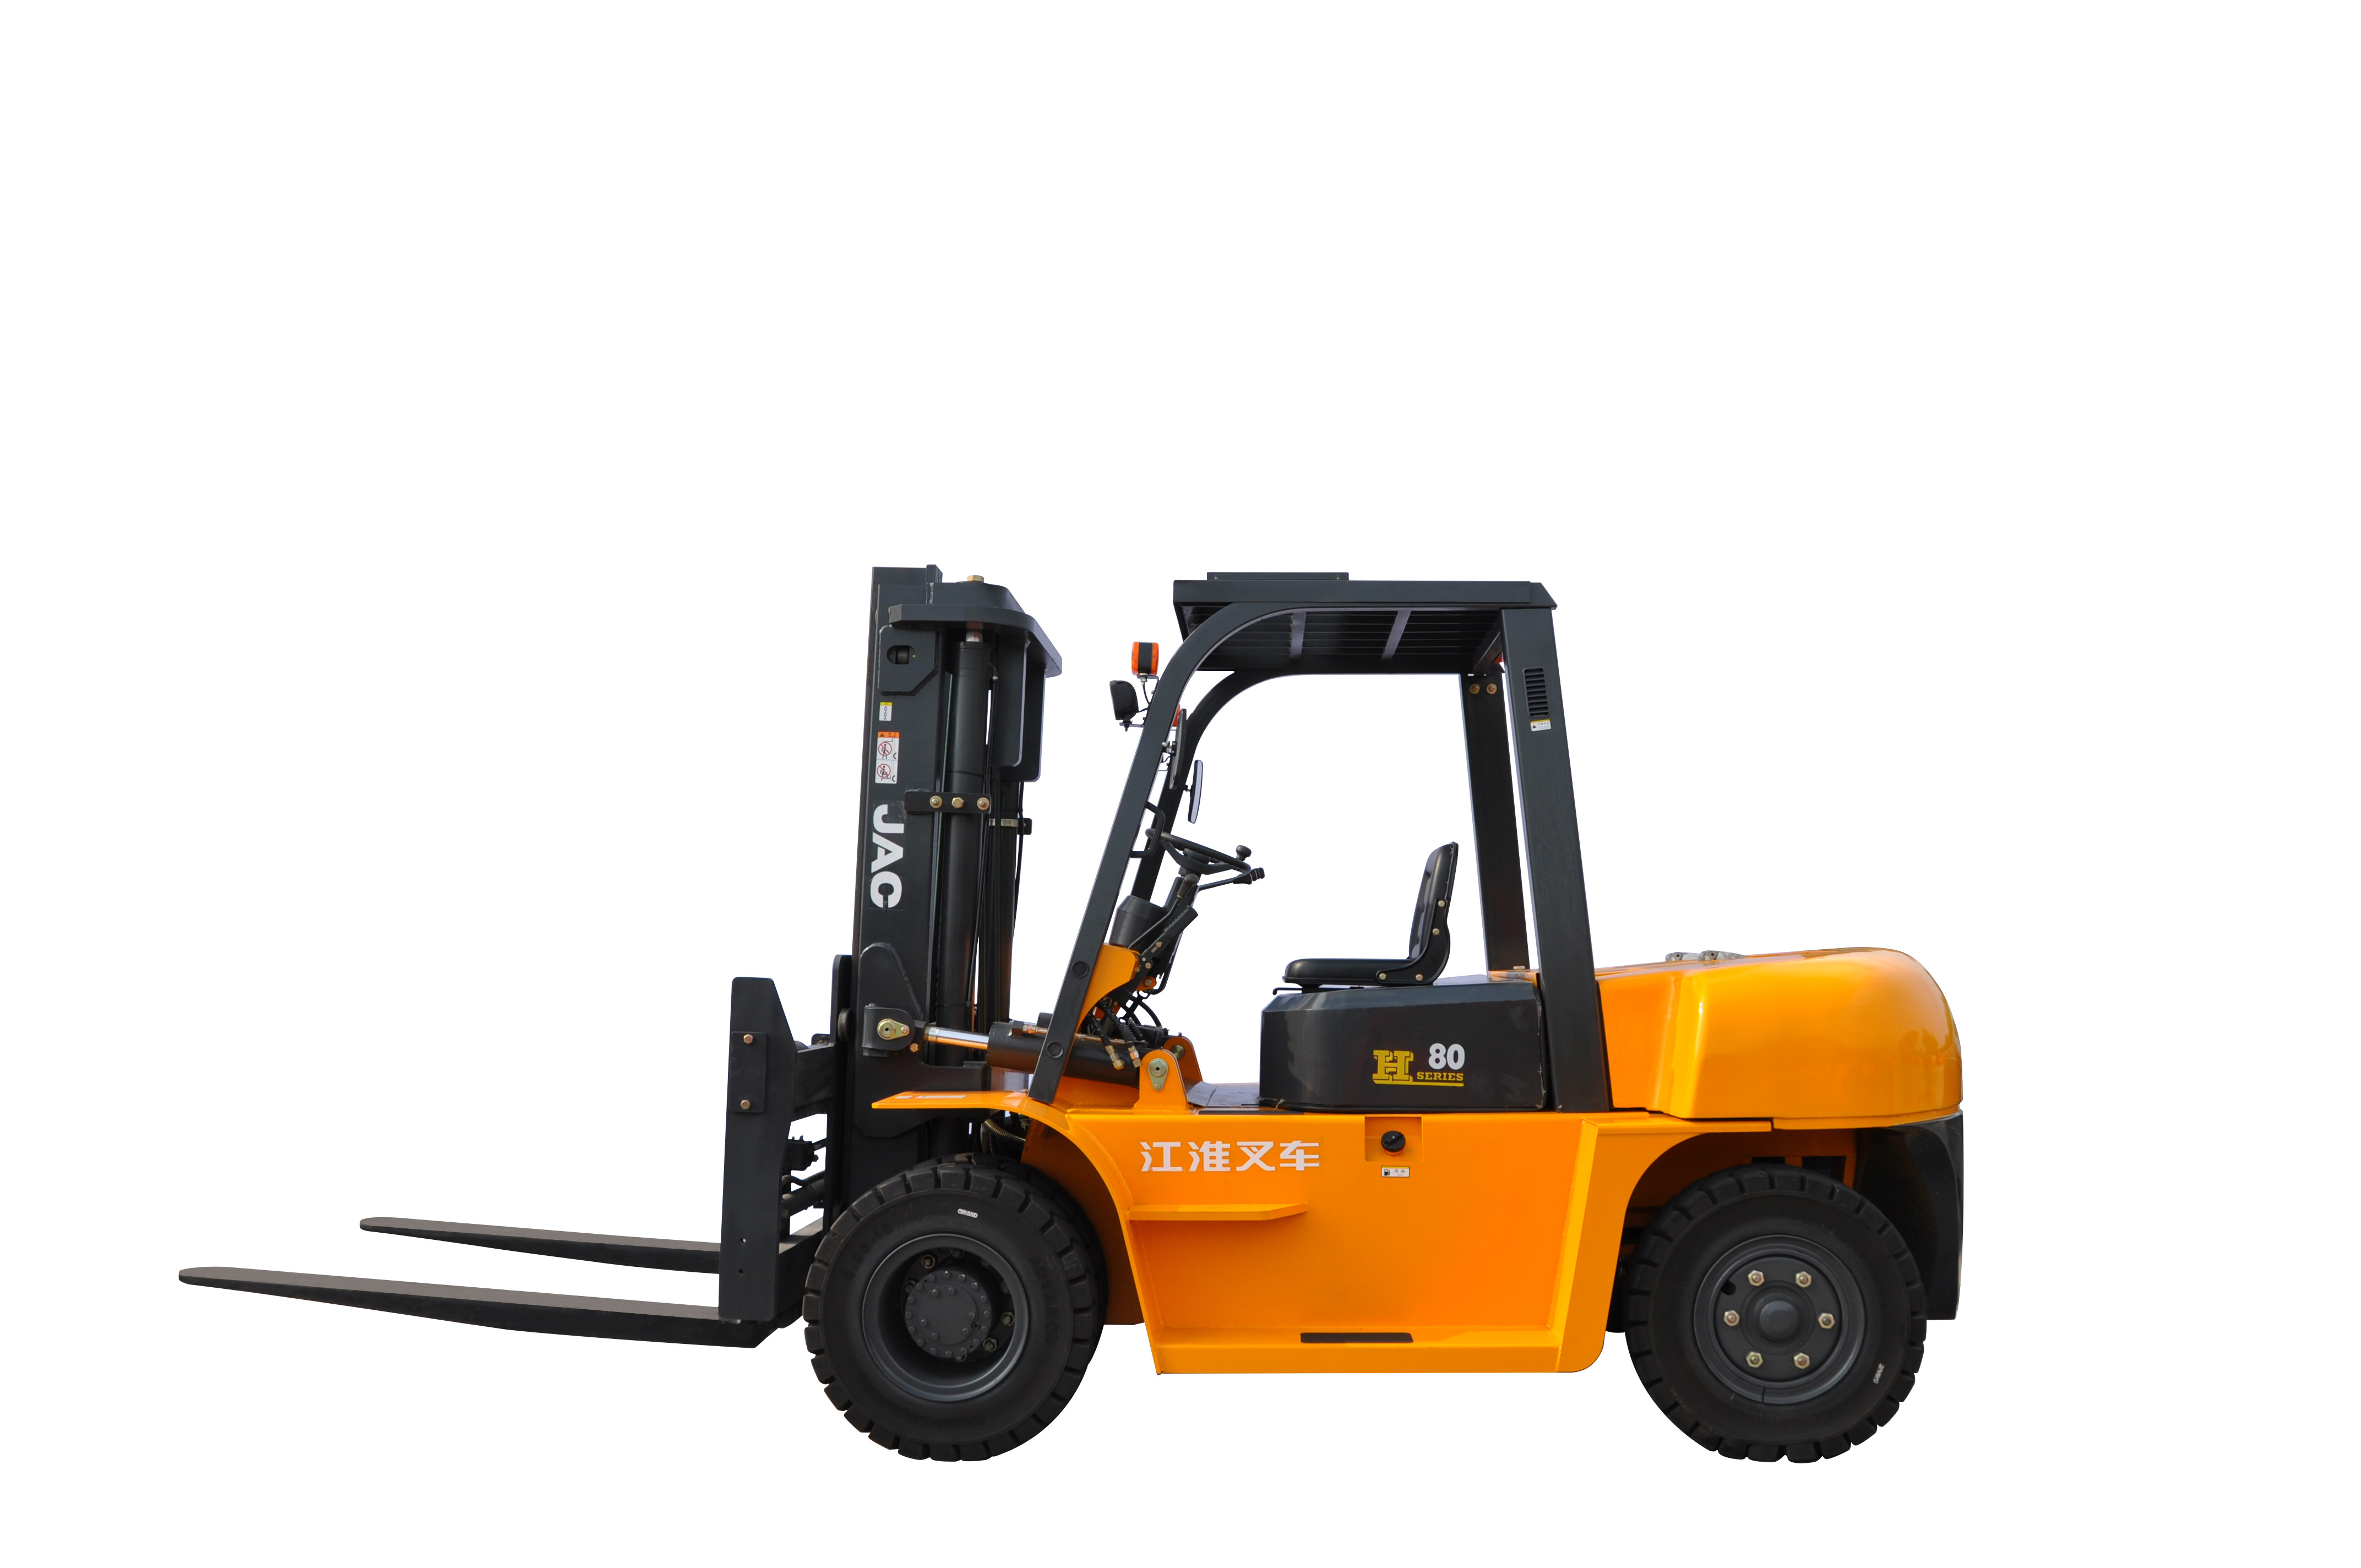  Large Capacity 7 Ton JAC Diesel Forklift Truck Small Turning Radius CE Certification Manufactures